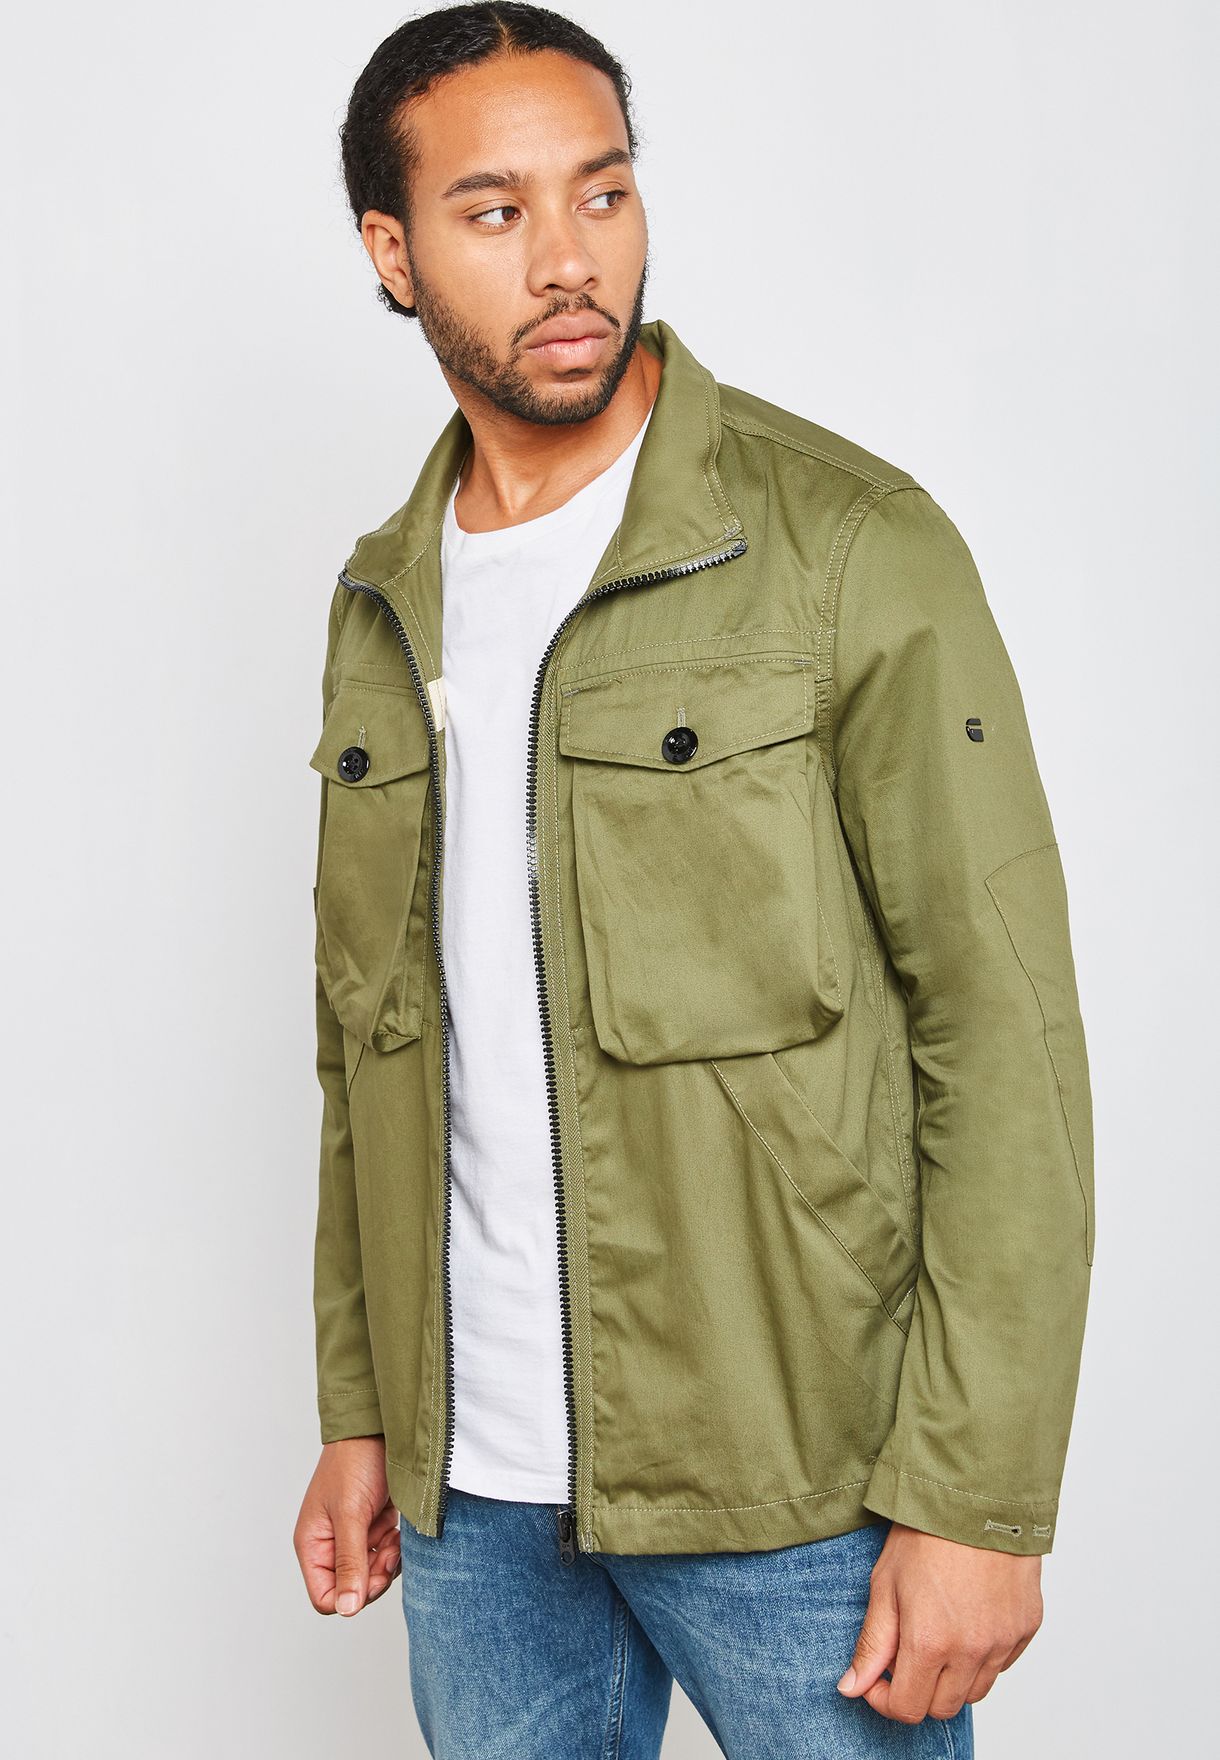 Buy G Star Raw green Utility Jacket for 